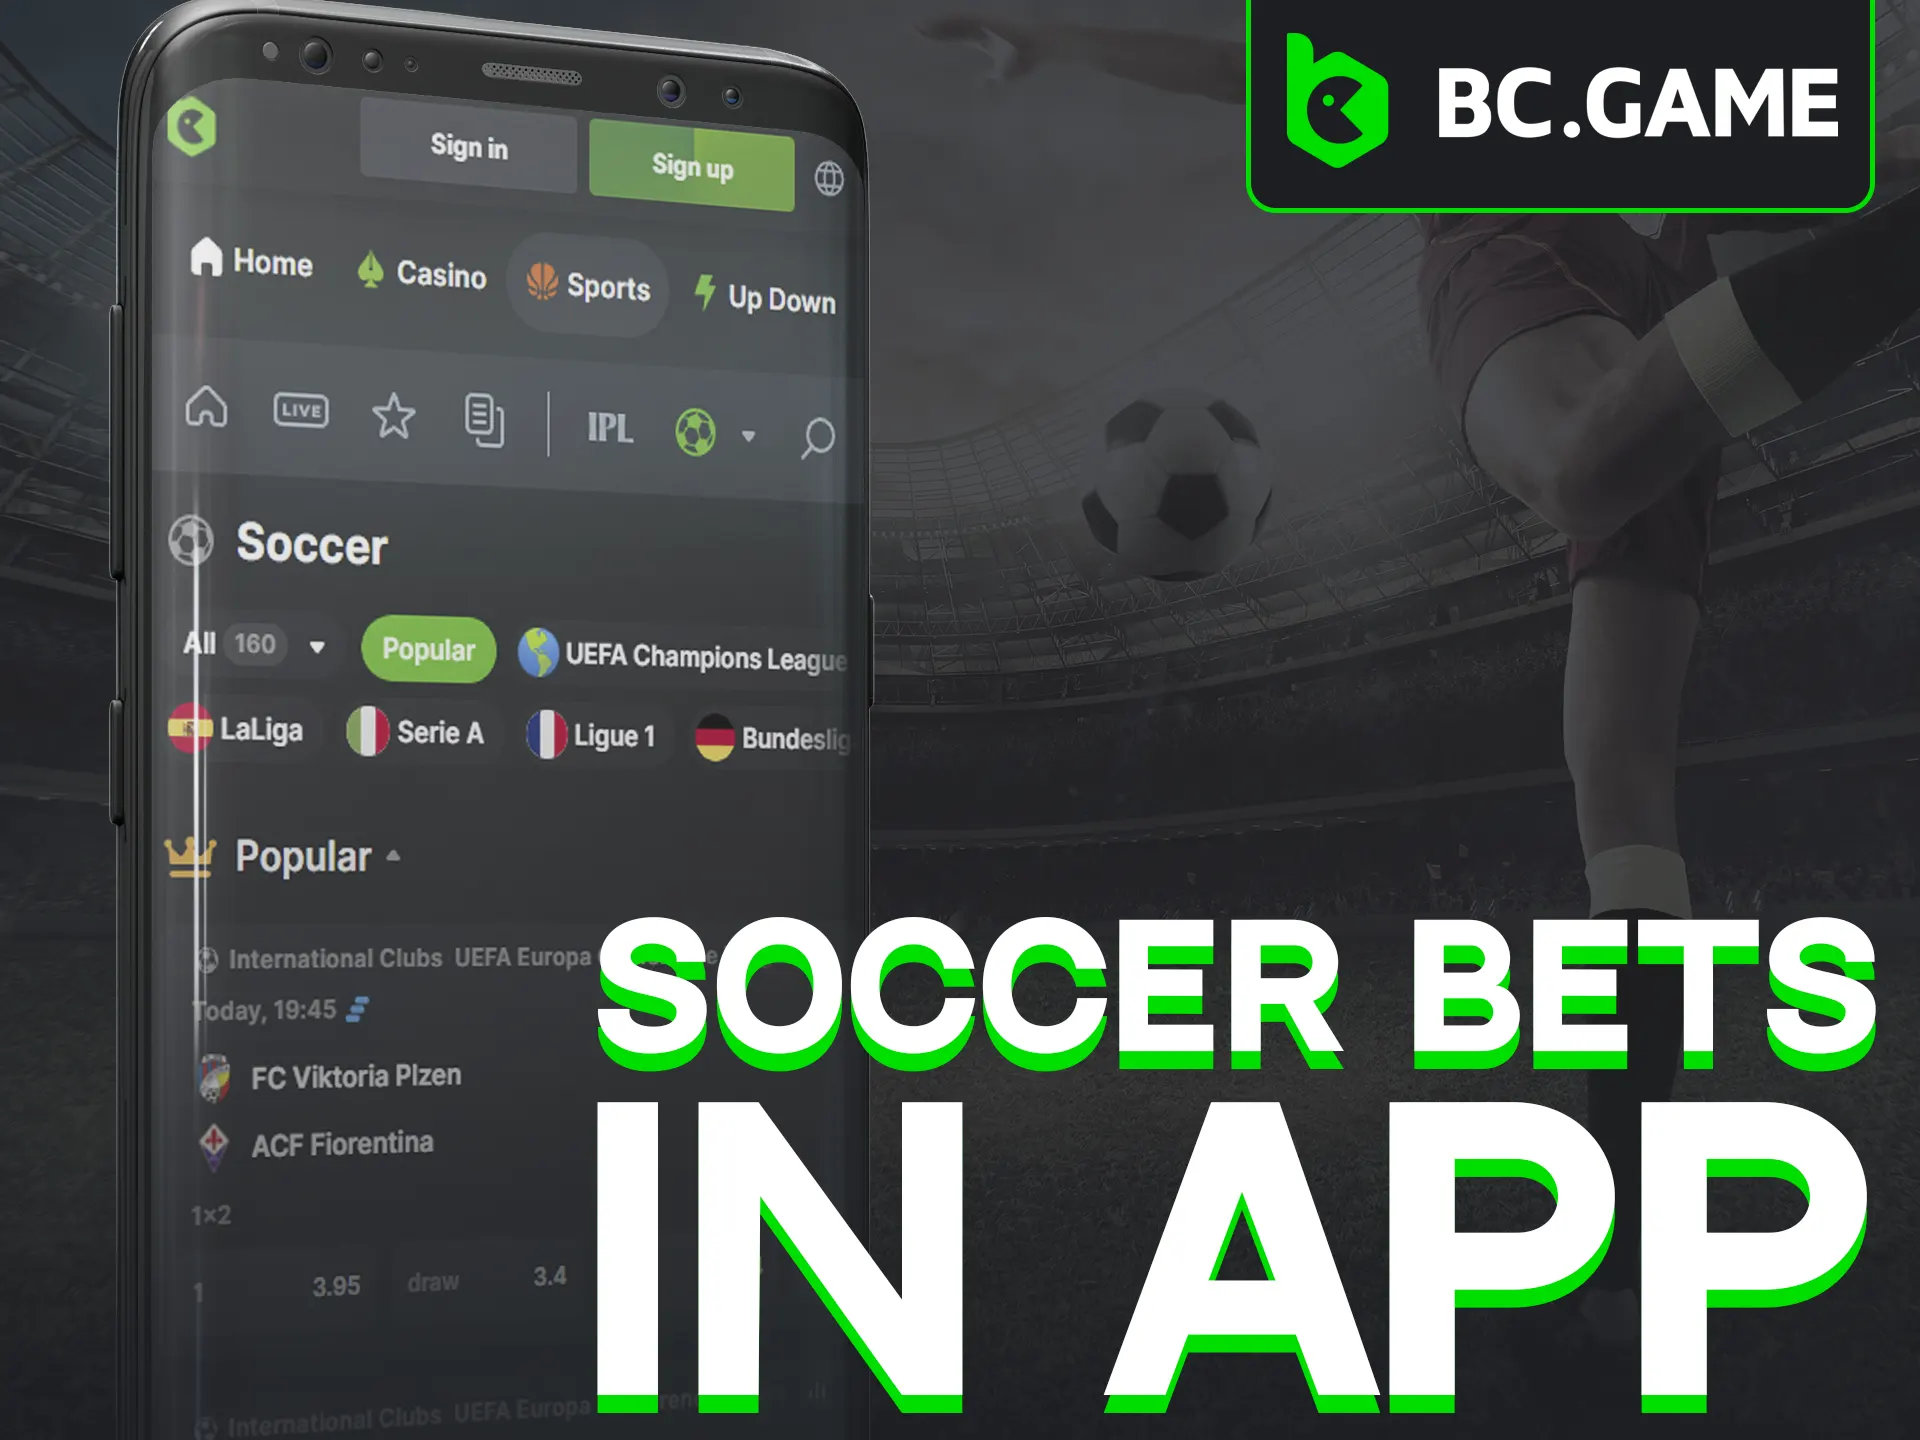 Bet on soccer with BC Game's secure mobile platform.